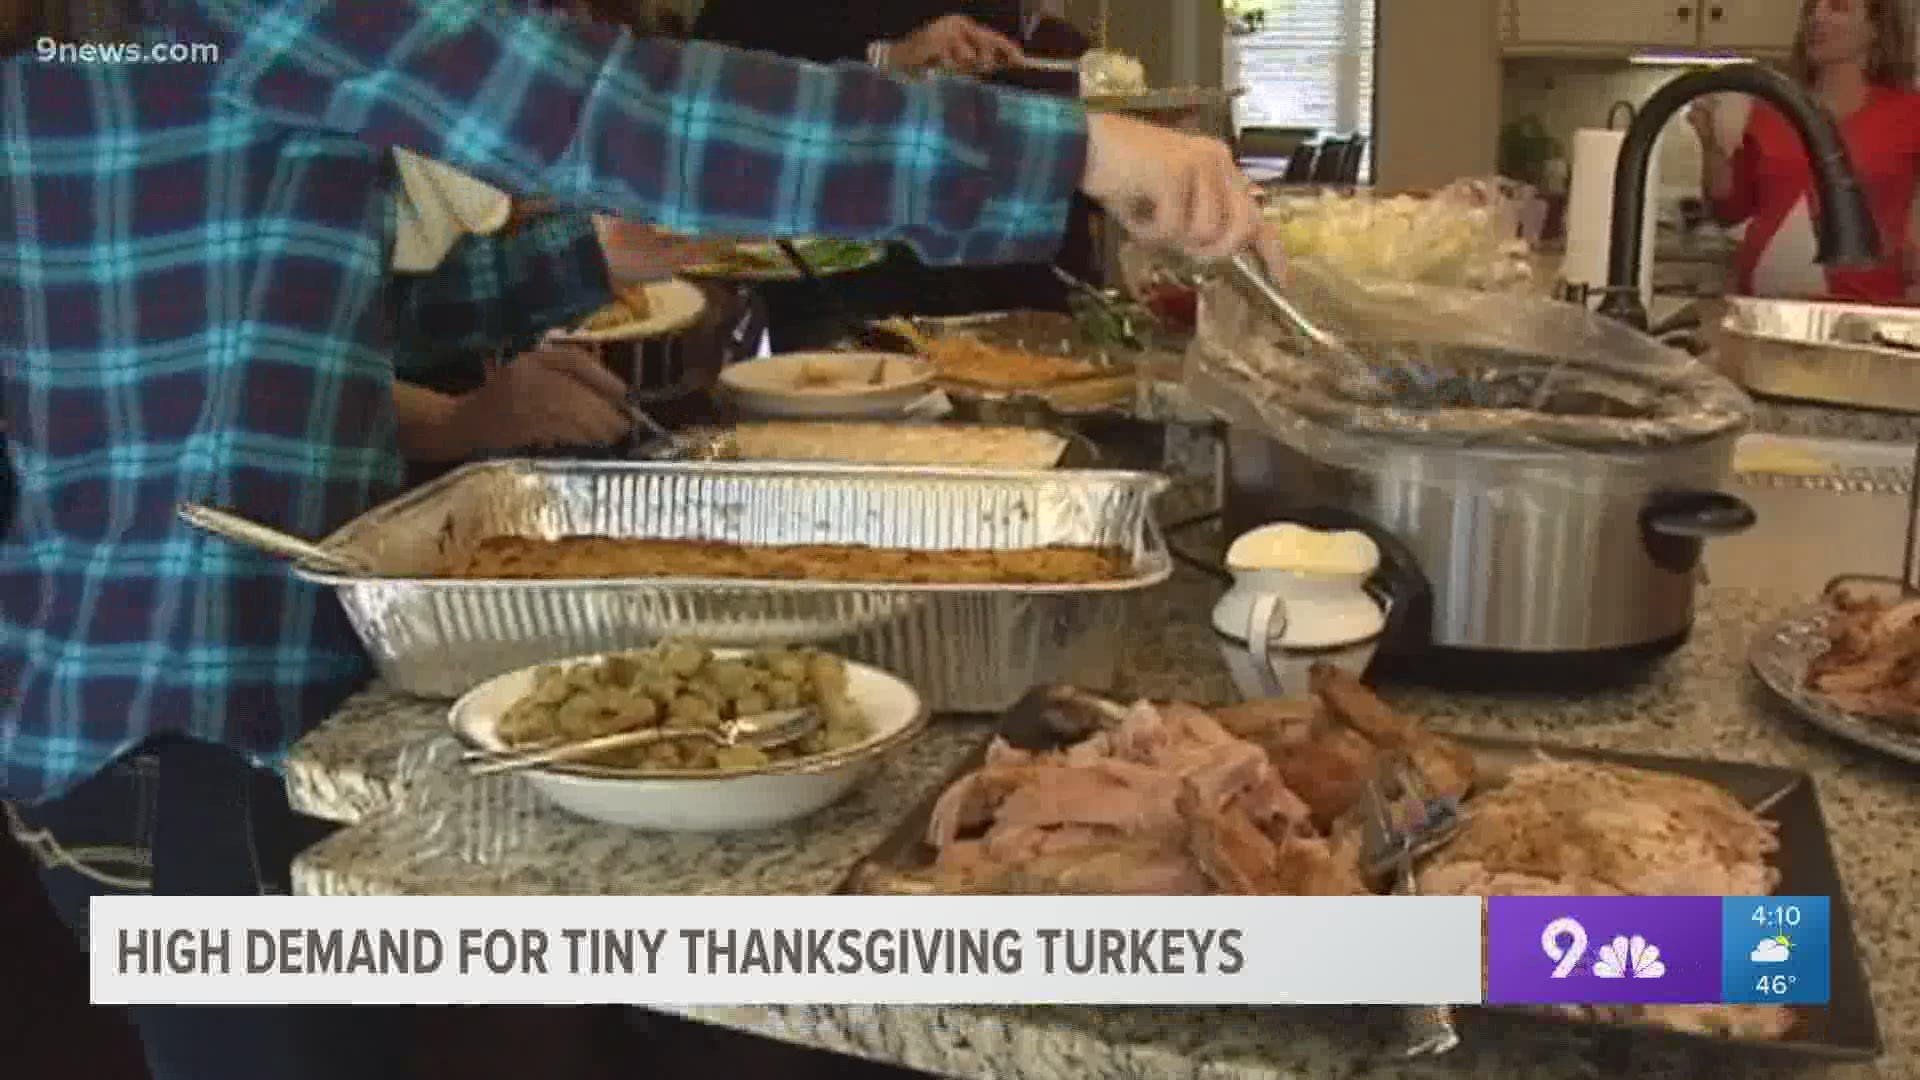 Many families intend on a smaller Thanksgiving gathering due to the COVID-19 pandemic, and experts said that means they'll be looking for smaller turkeys.